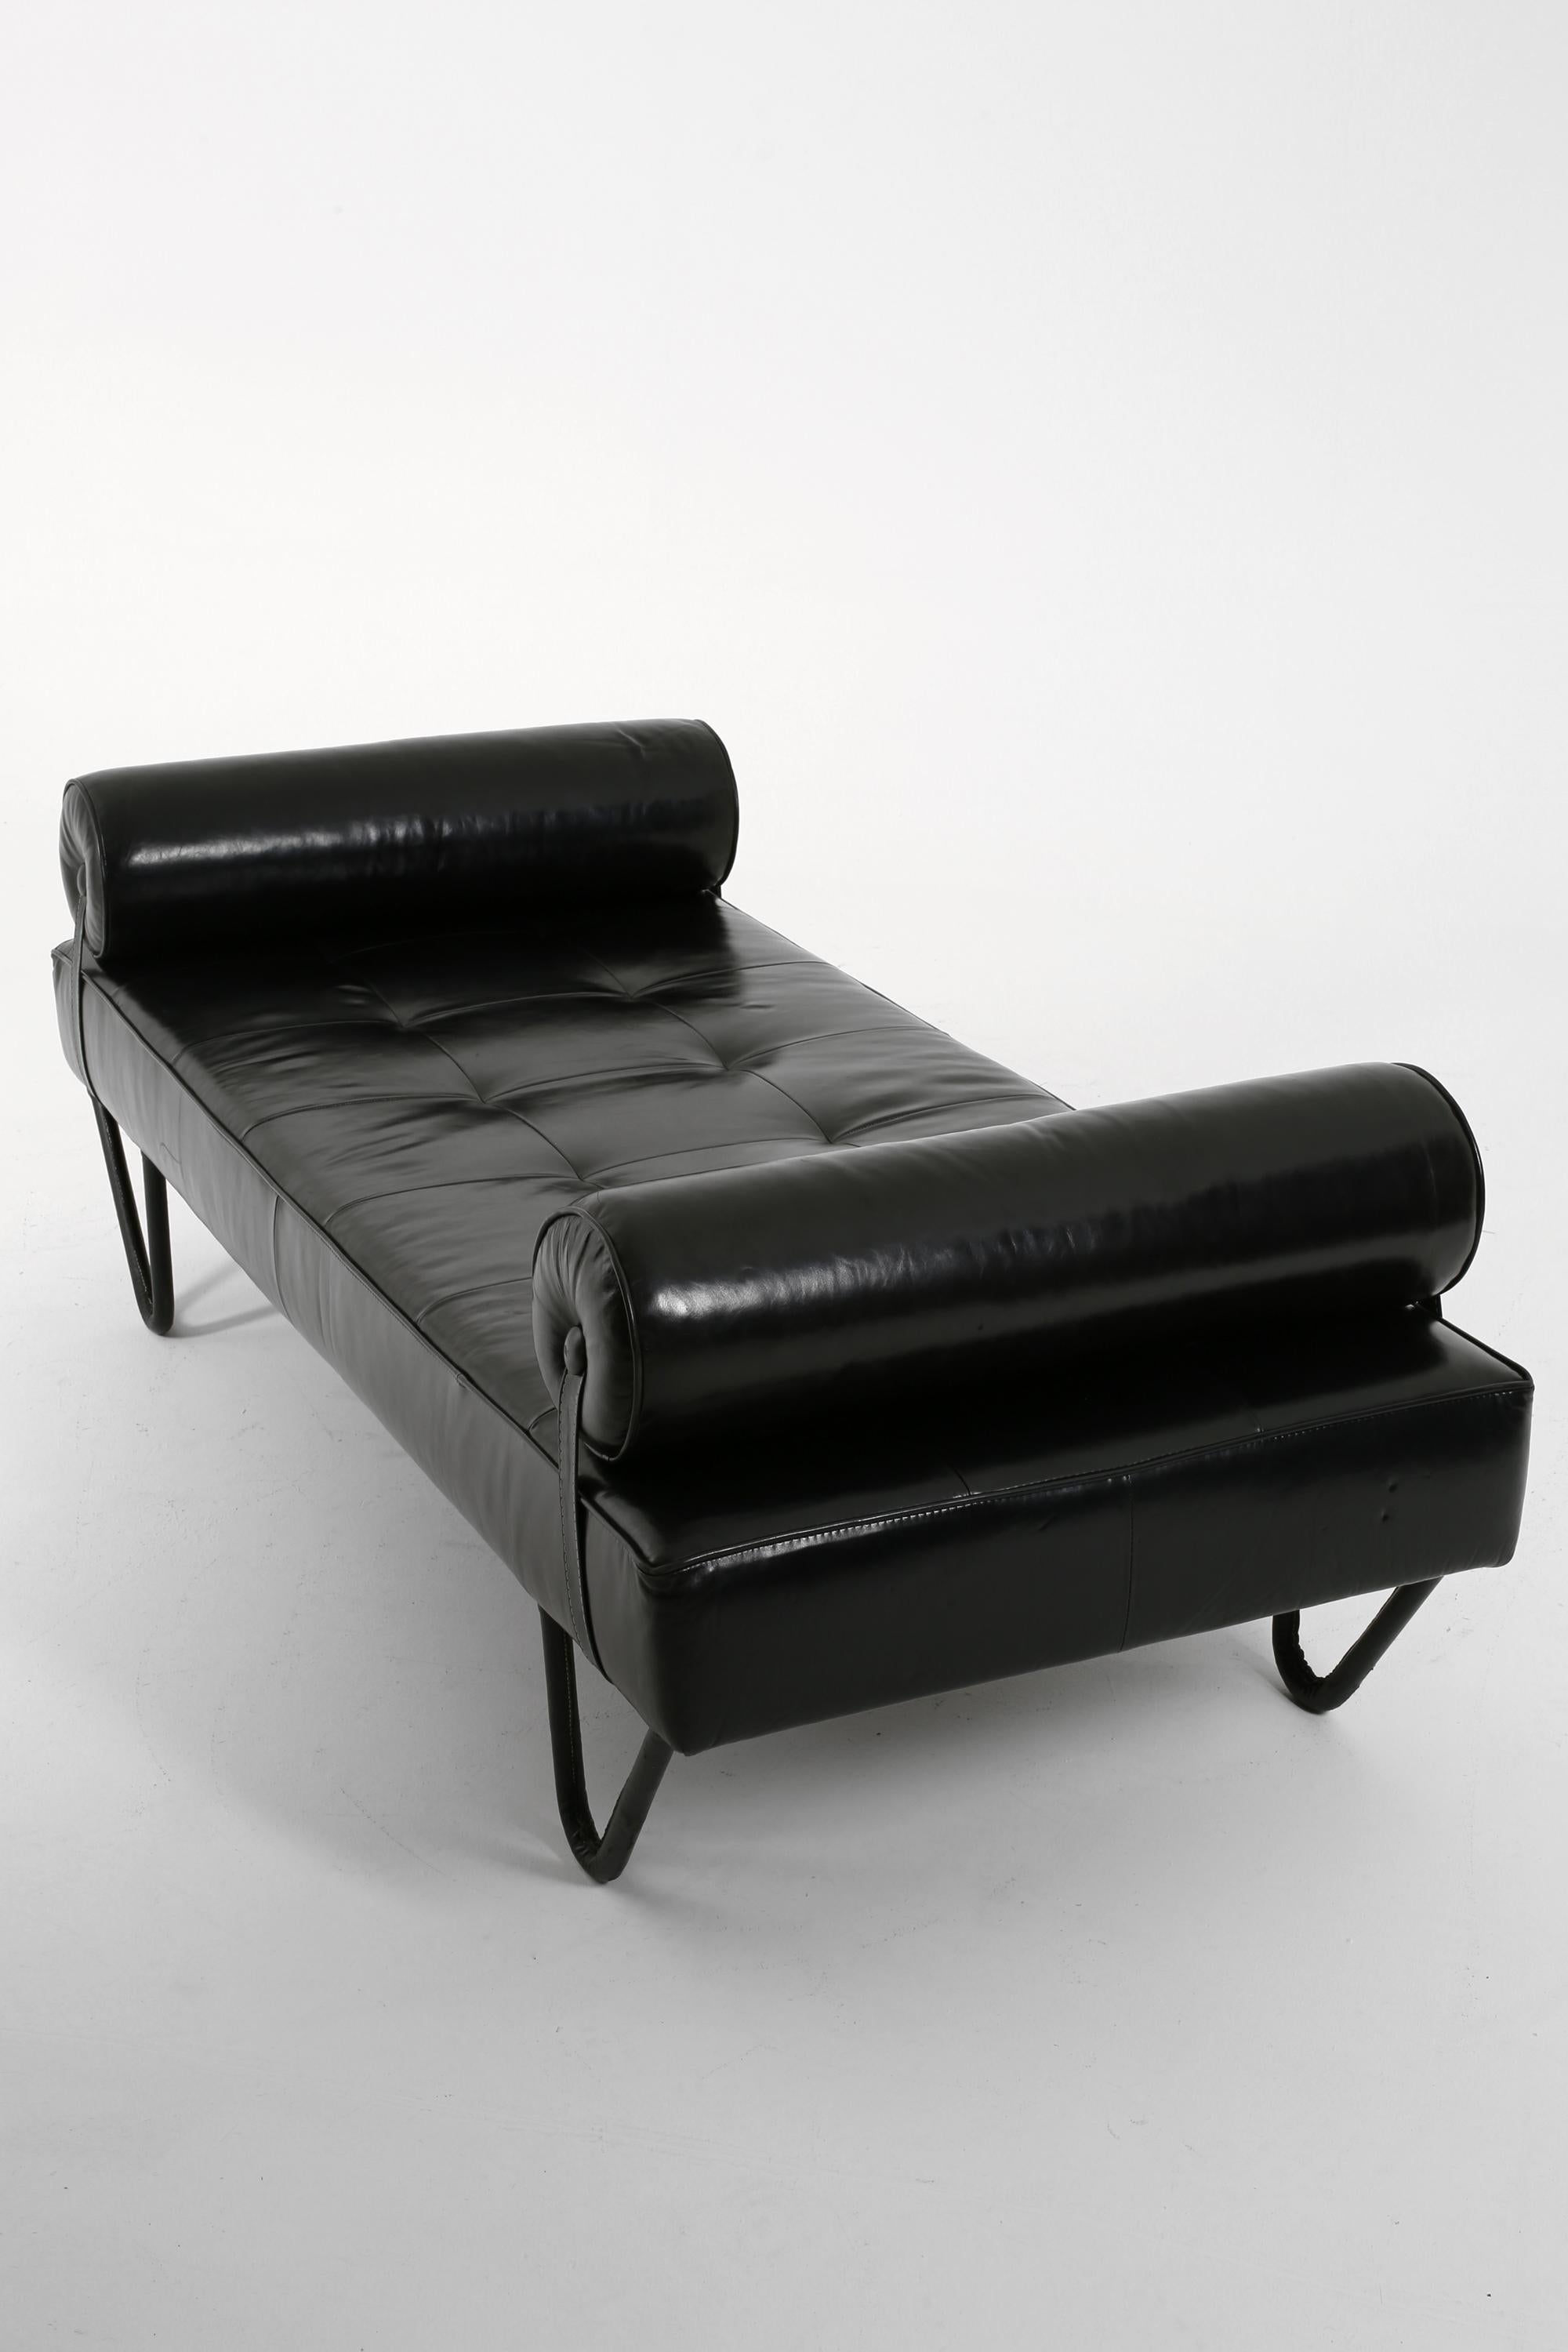 Mid-Century Modern Black Leather Daybed by Jacques Adnet